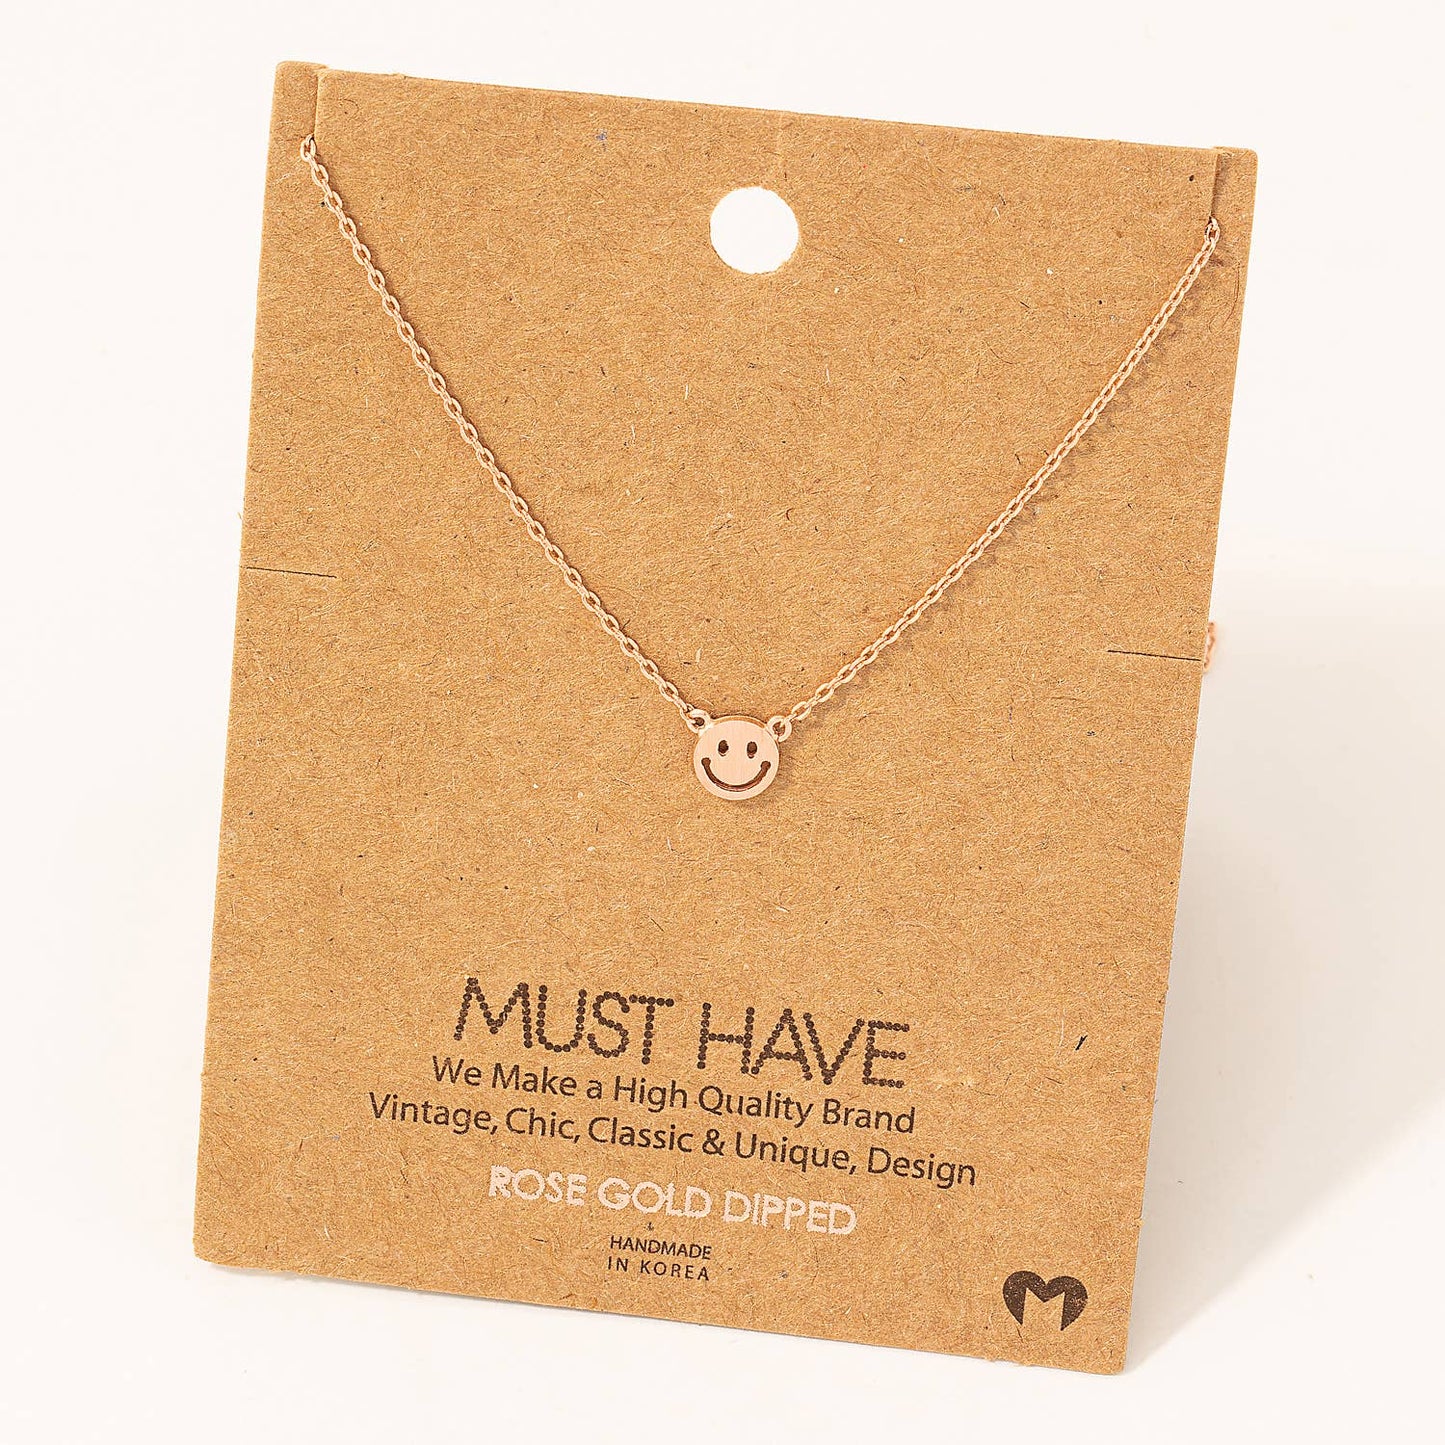 Smiley Face Charm Necklace